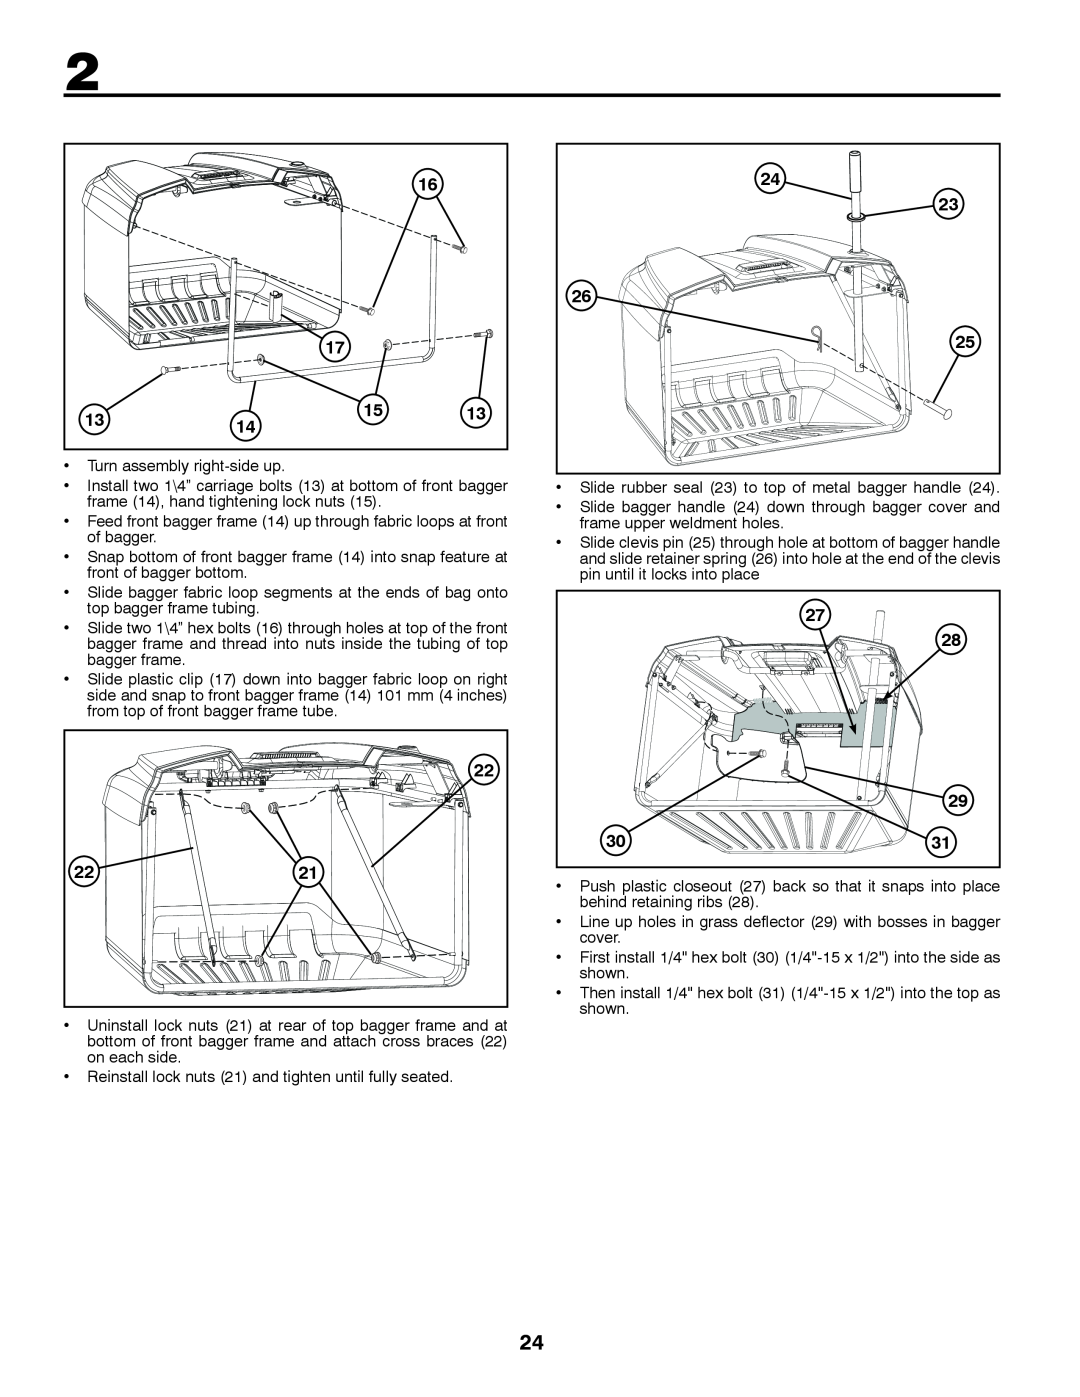 Jonsered LT2213C instruction manual • Turn assembly right-sideup 